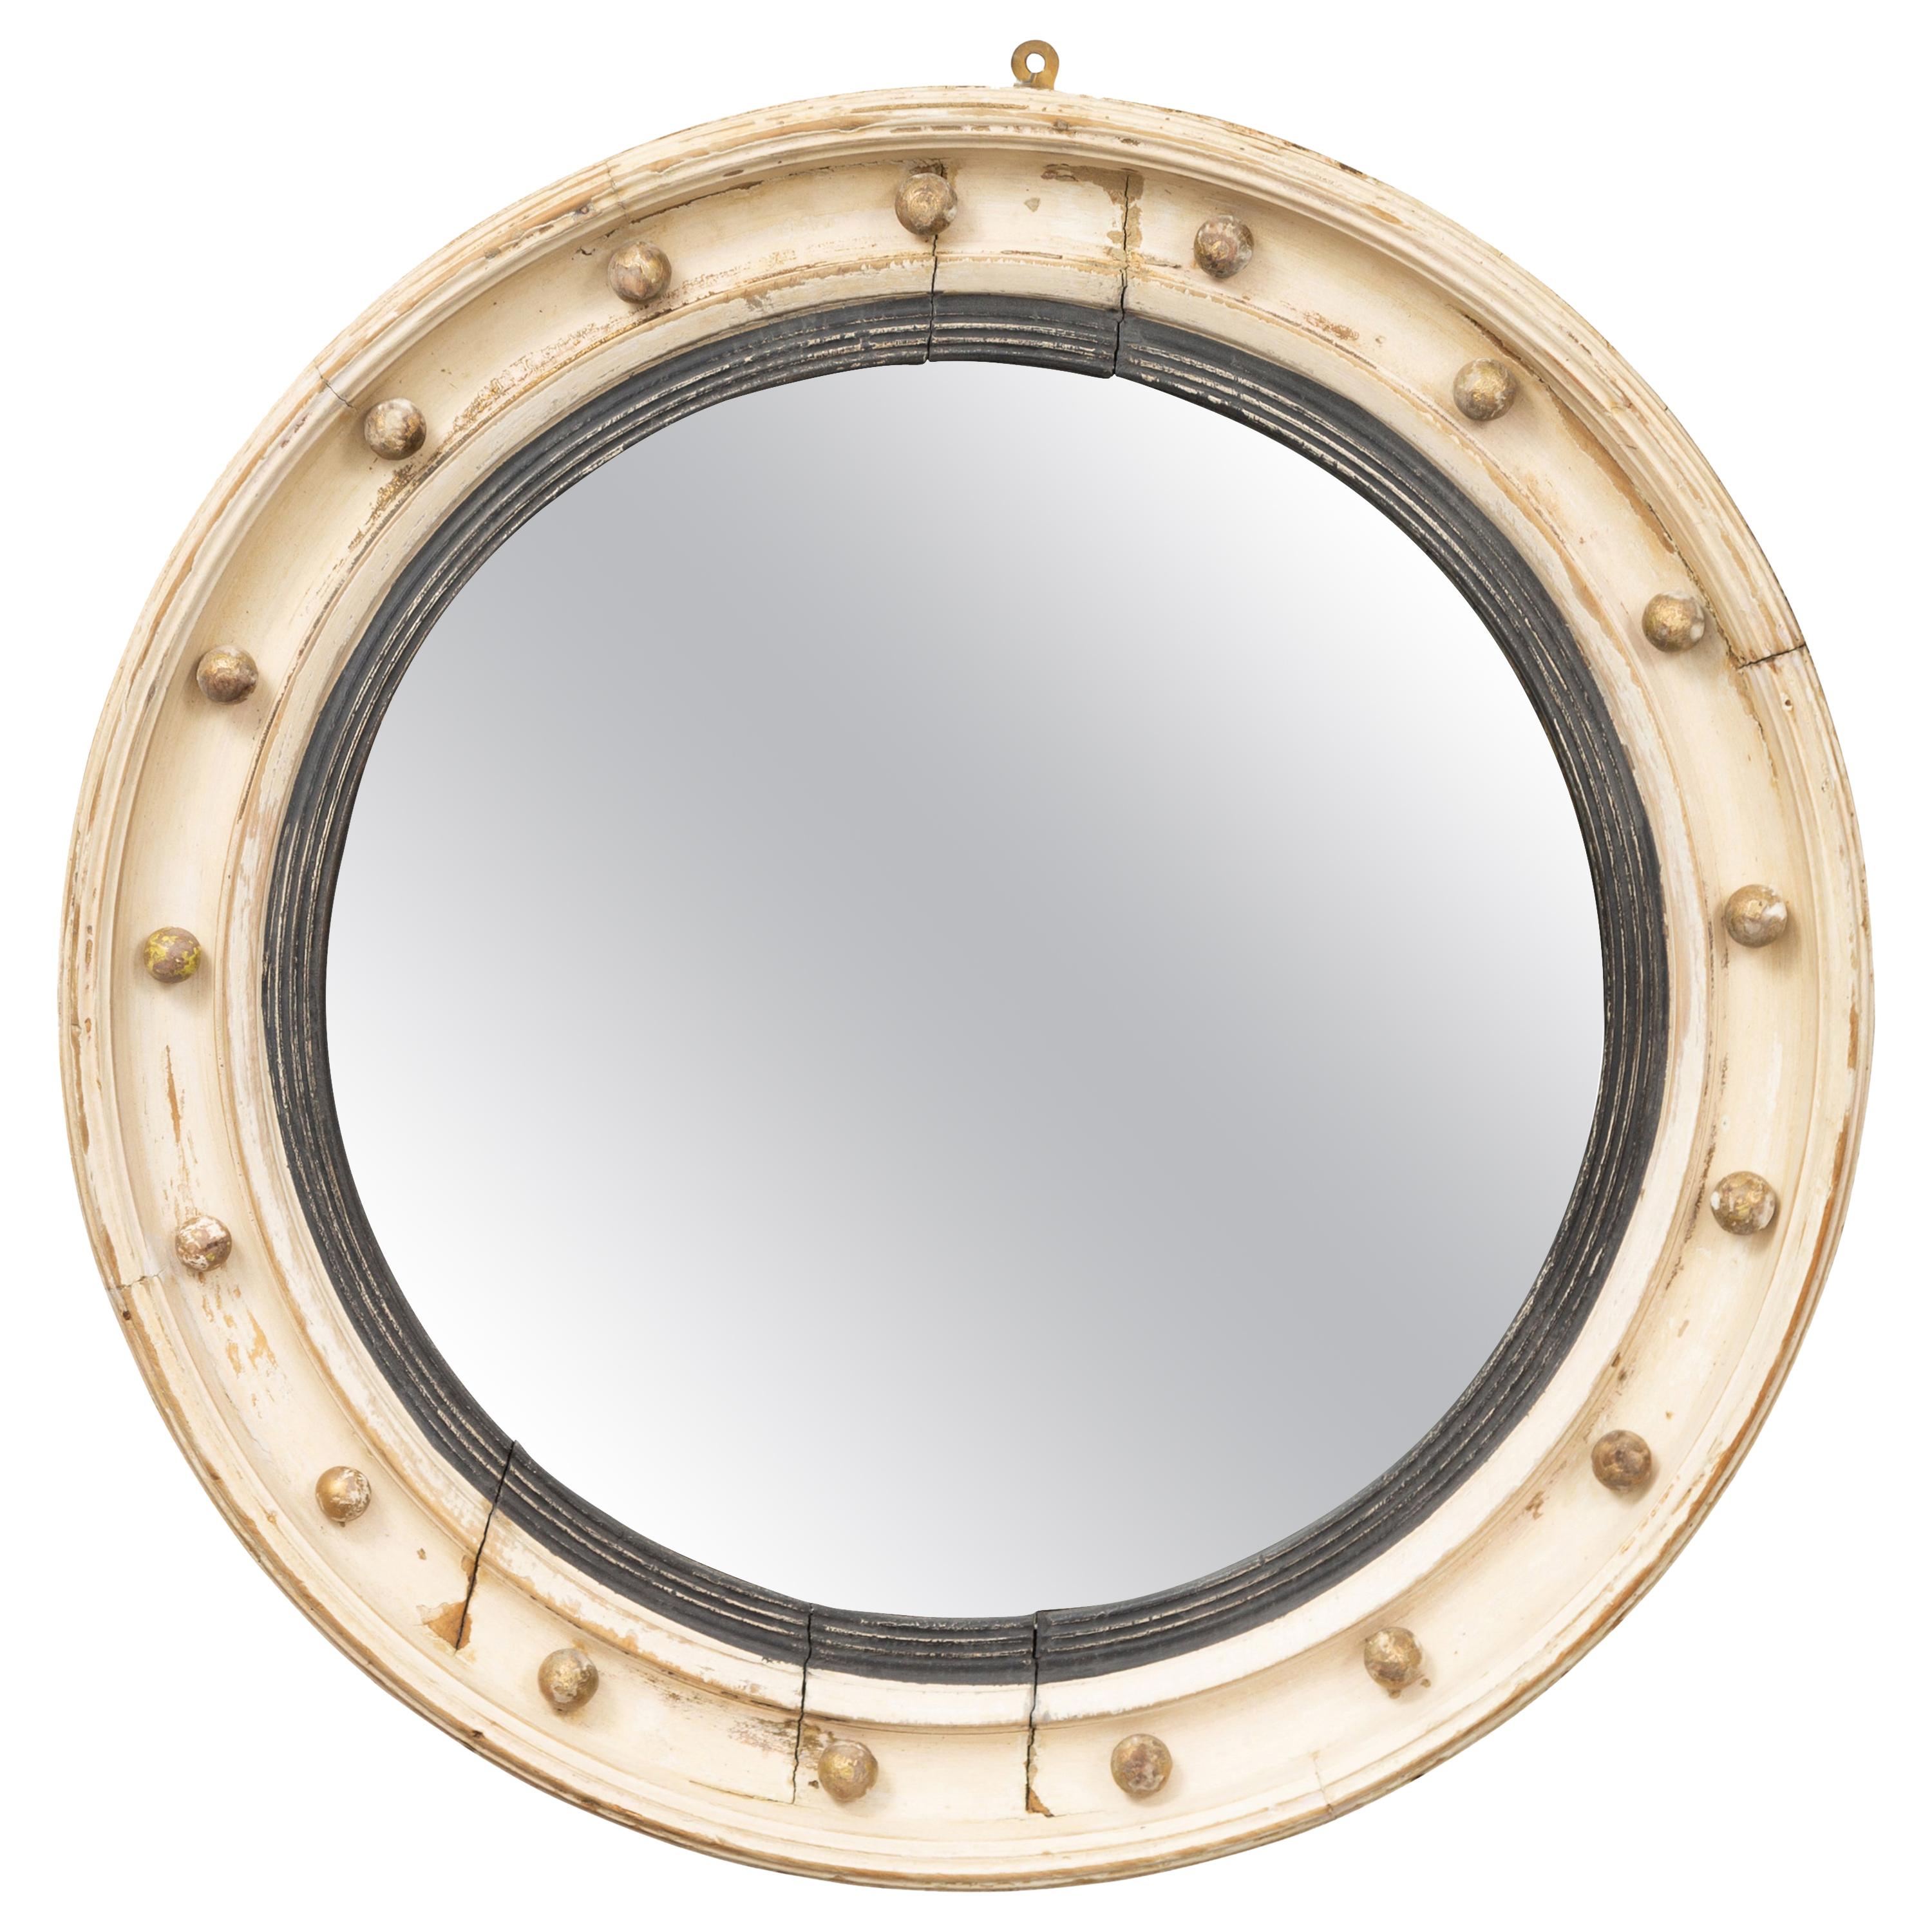 English 1870s Painted Wood Convex Bullseye Mirror with Ebonized Accents